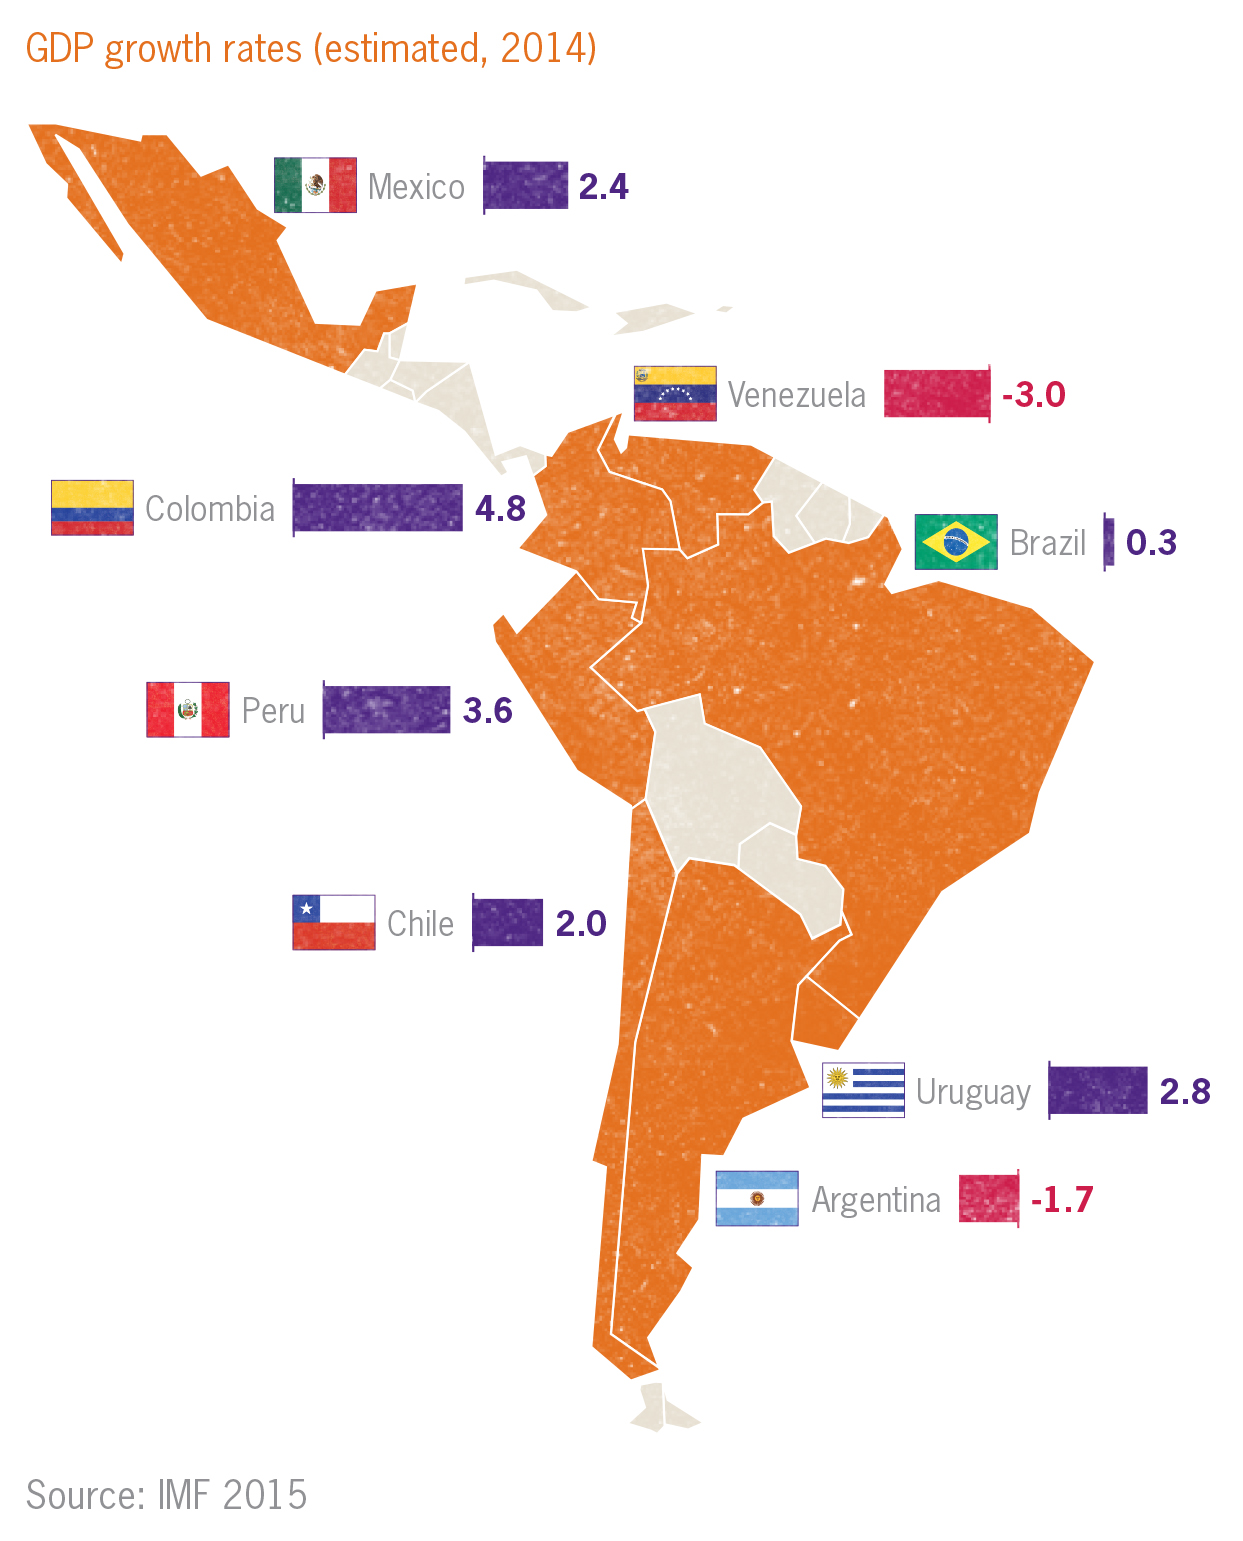 GDP growth rates in Latin America